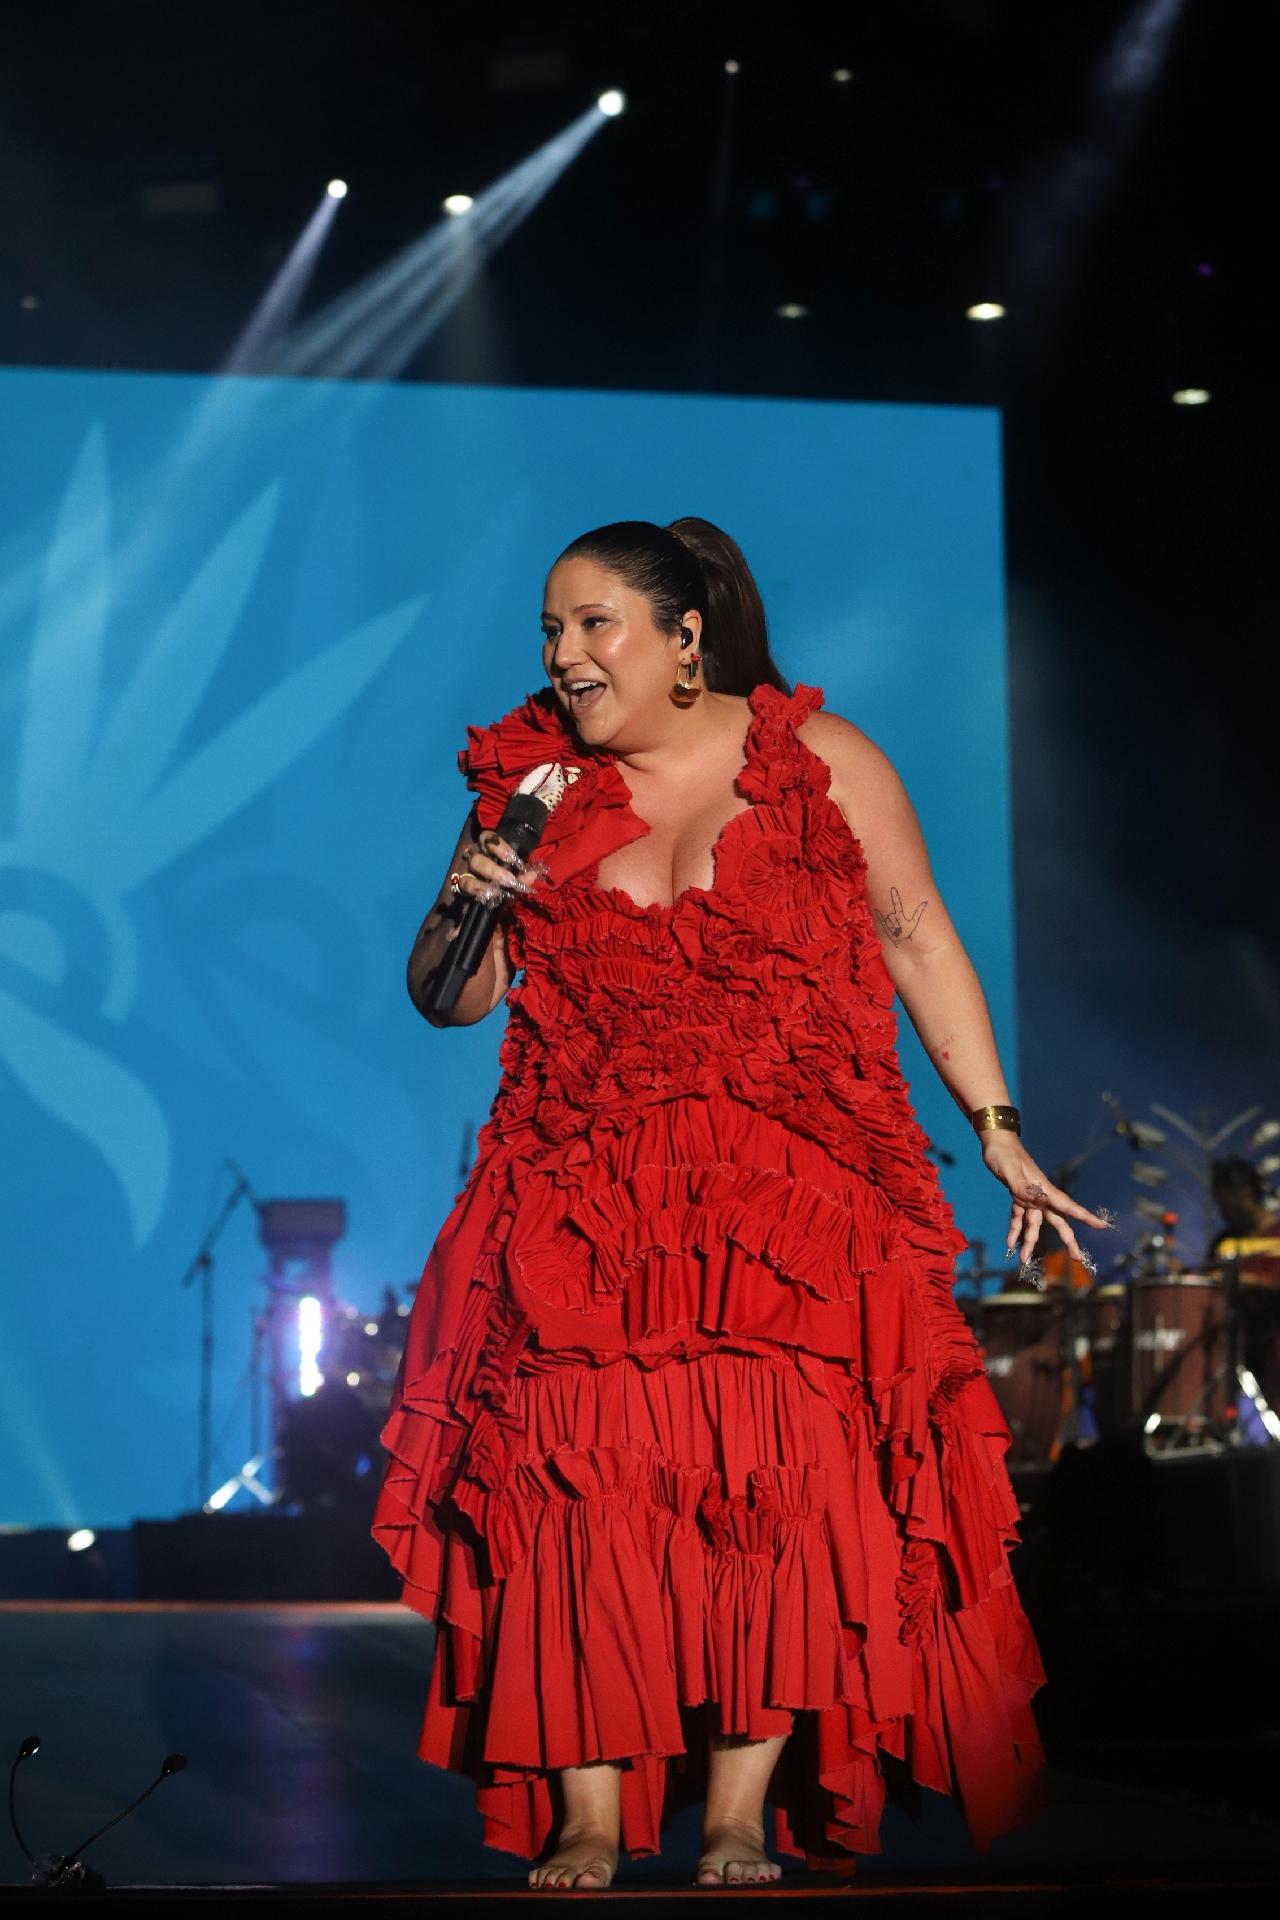 Maria Rita performs on the Sunset stage and attracts attention with her red dress on the sixth day of Rock in Rio - Zô Guimarães/UOL